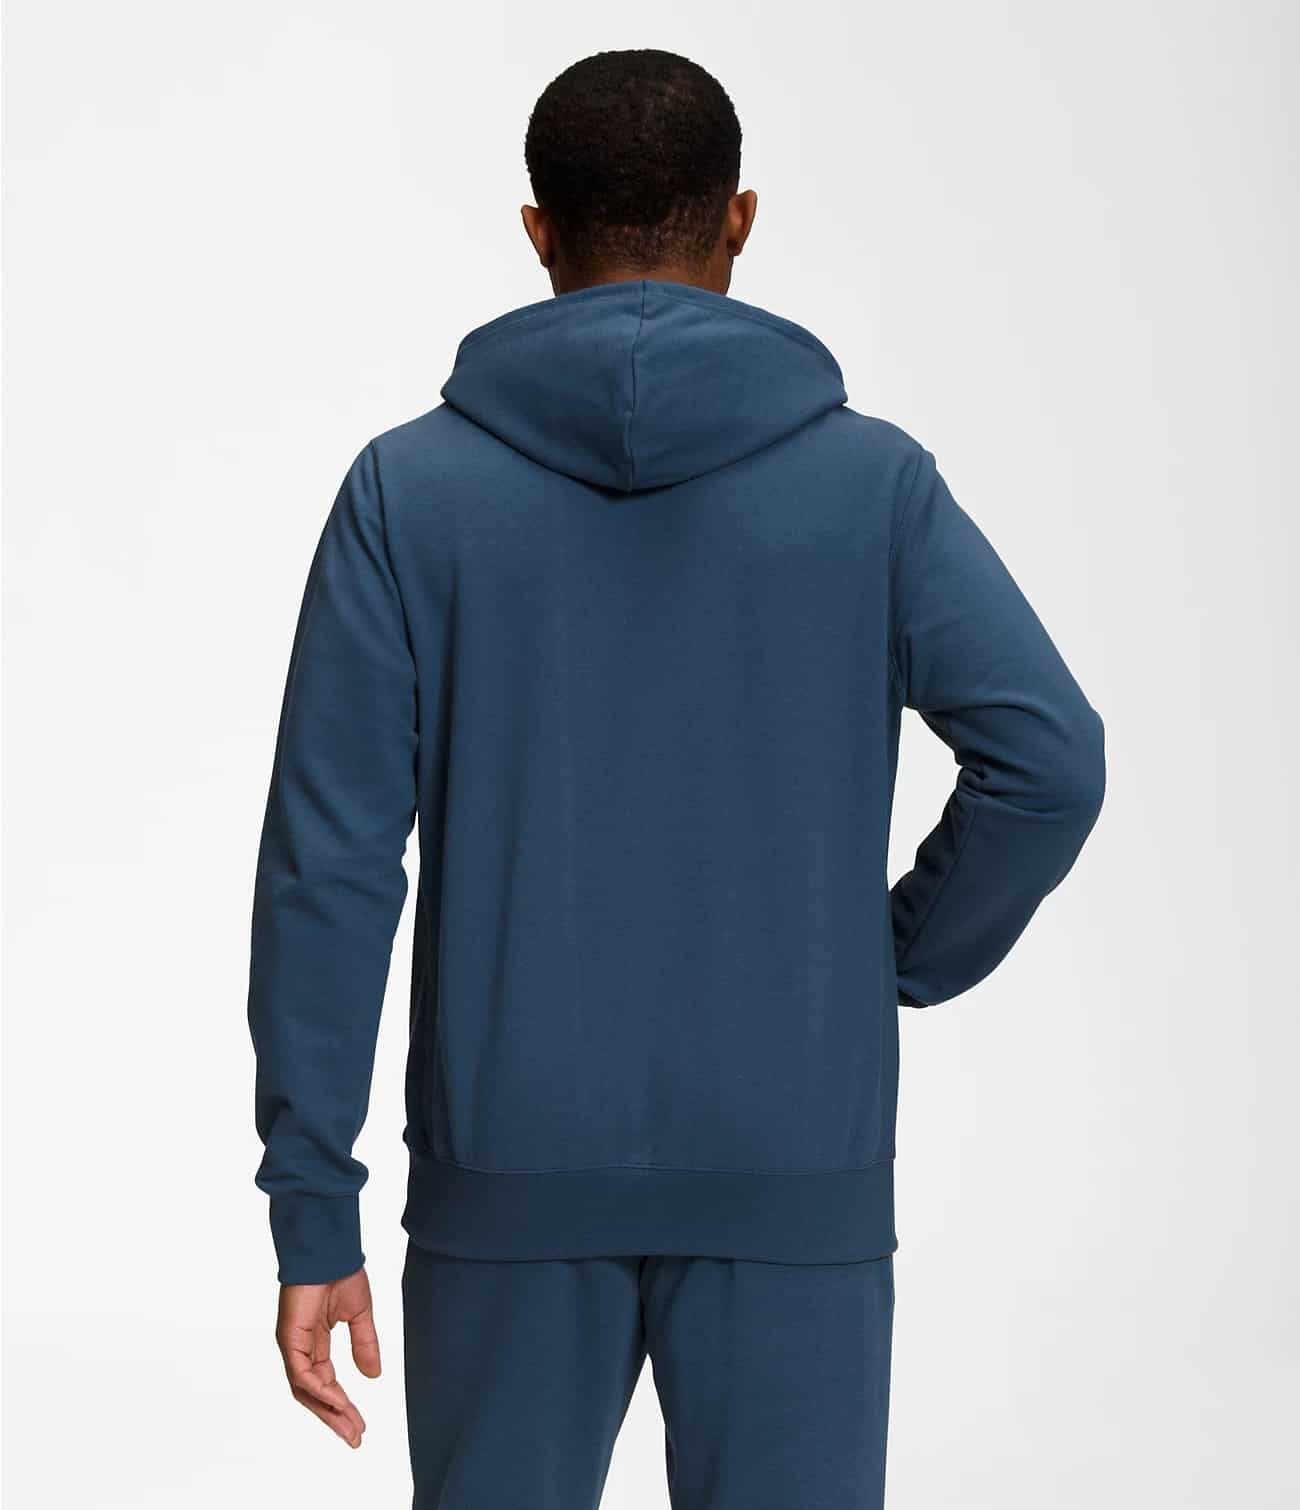 Prairie Summit Shop - The North Face Men’s Heritage Patch Pullover Hoodie